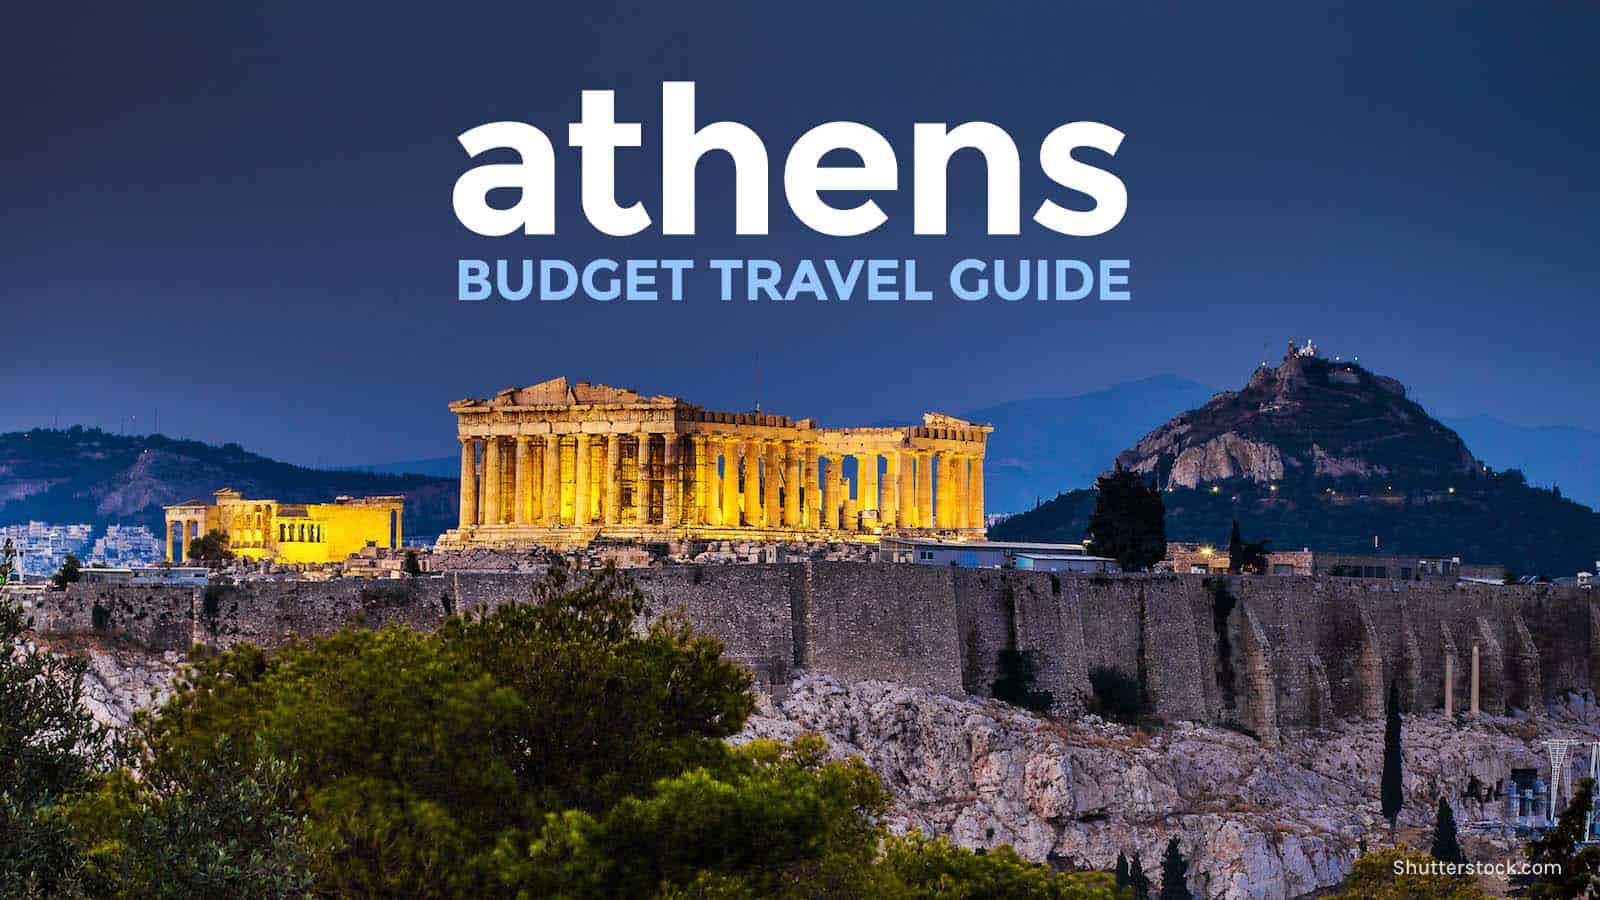 ATHENS TRAVEL GUIDE: Itinerary, Budget, Things to Do